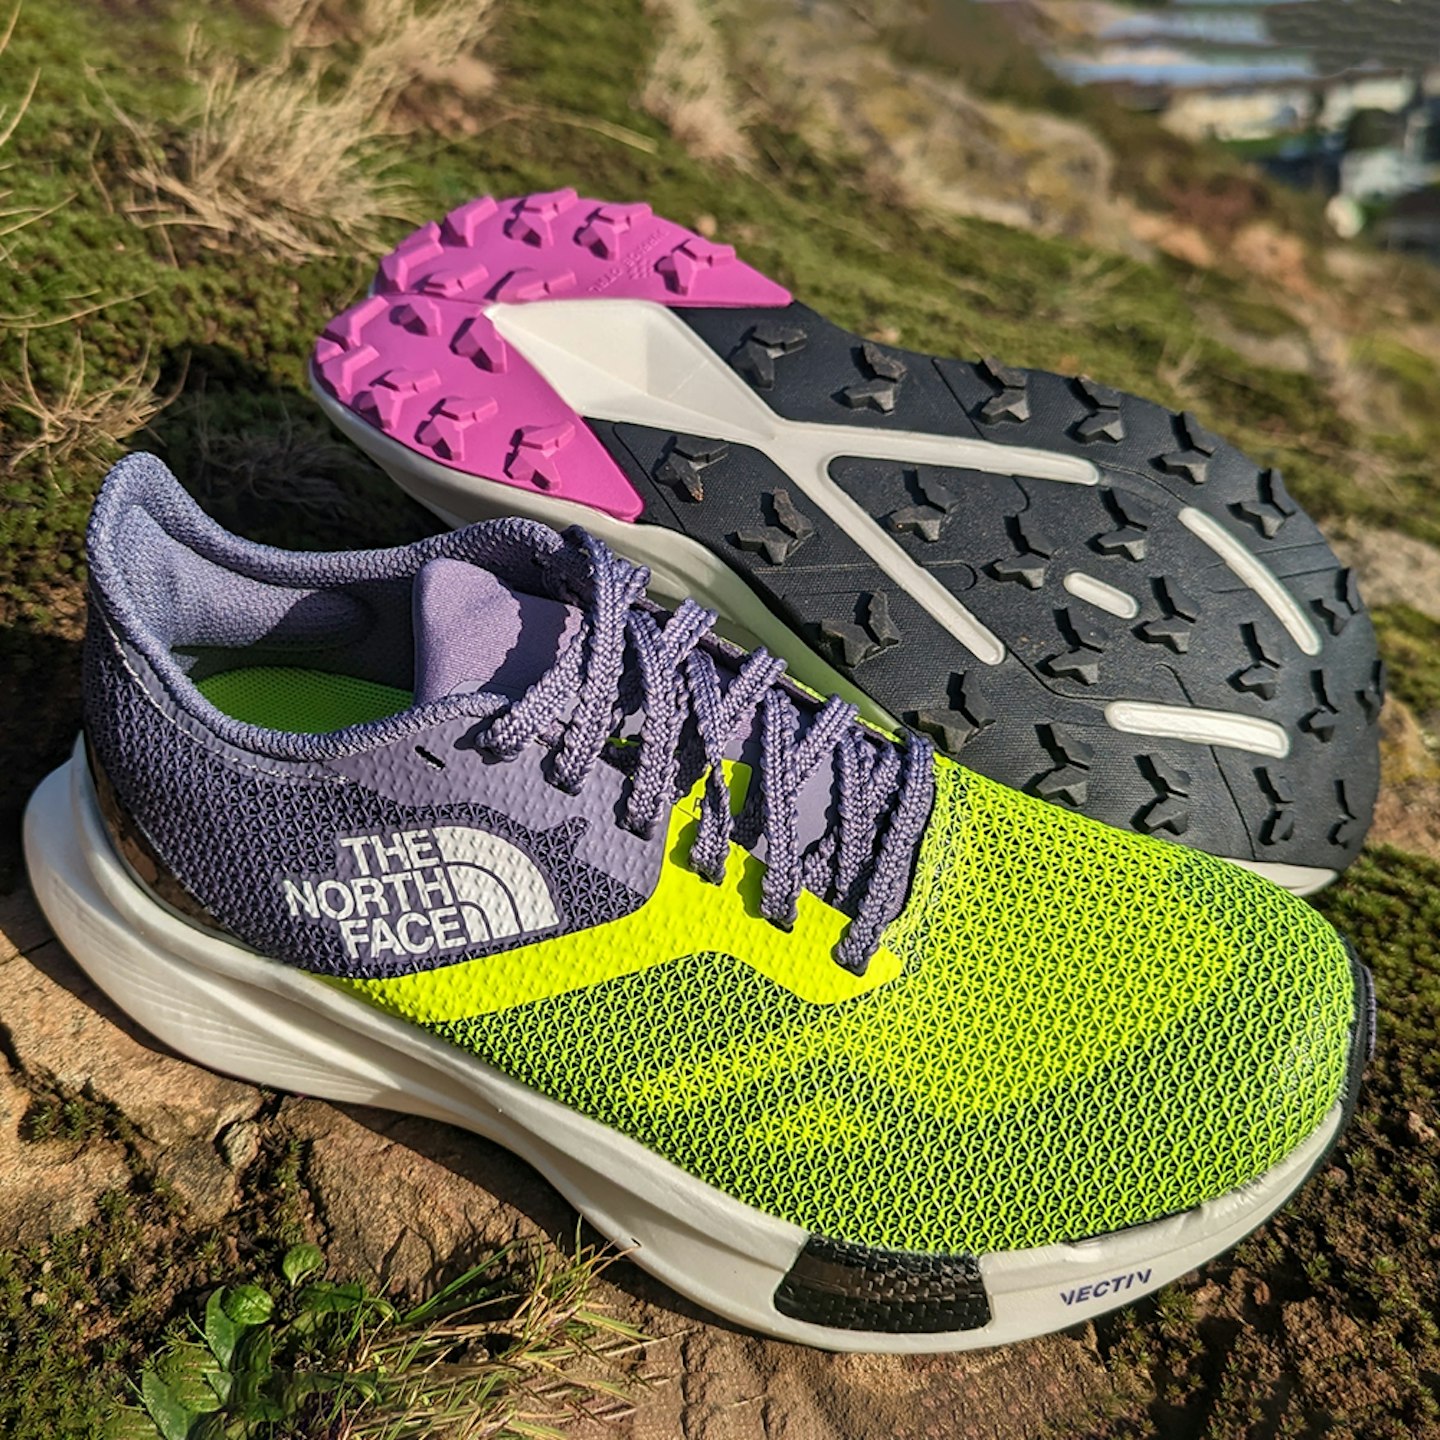 The North Face Summit Vectic Pro Shoe for alpine running